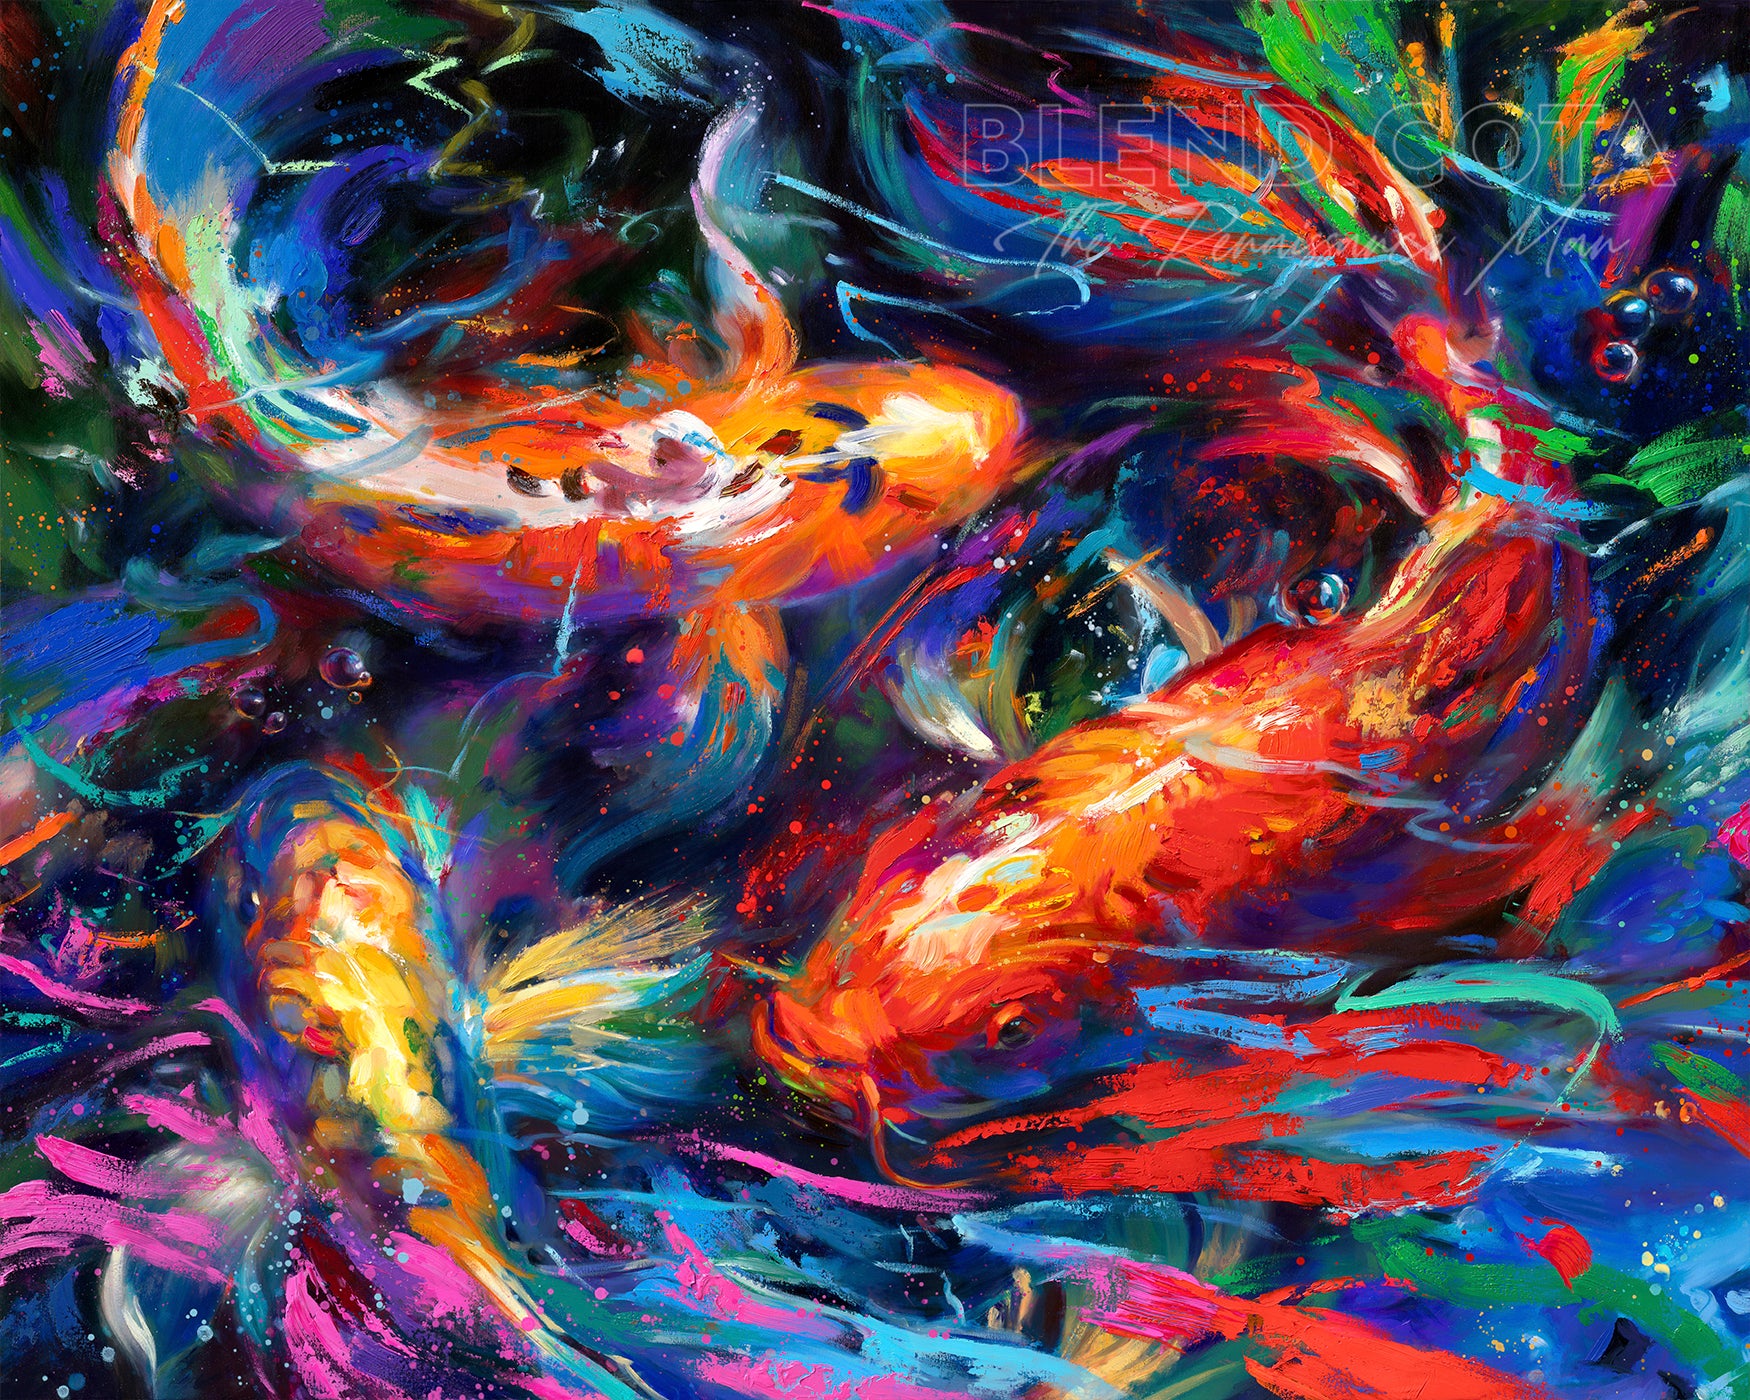 An oil painting by Blend Cota Studios depicting koi swimming through colorful brushstrokes